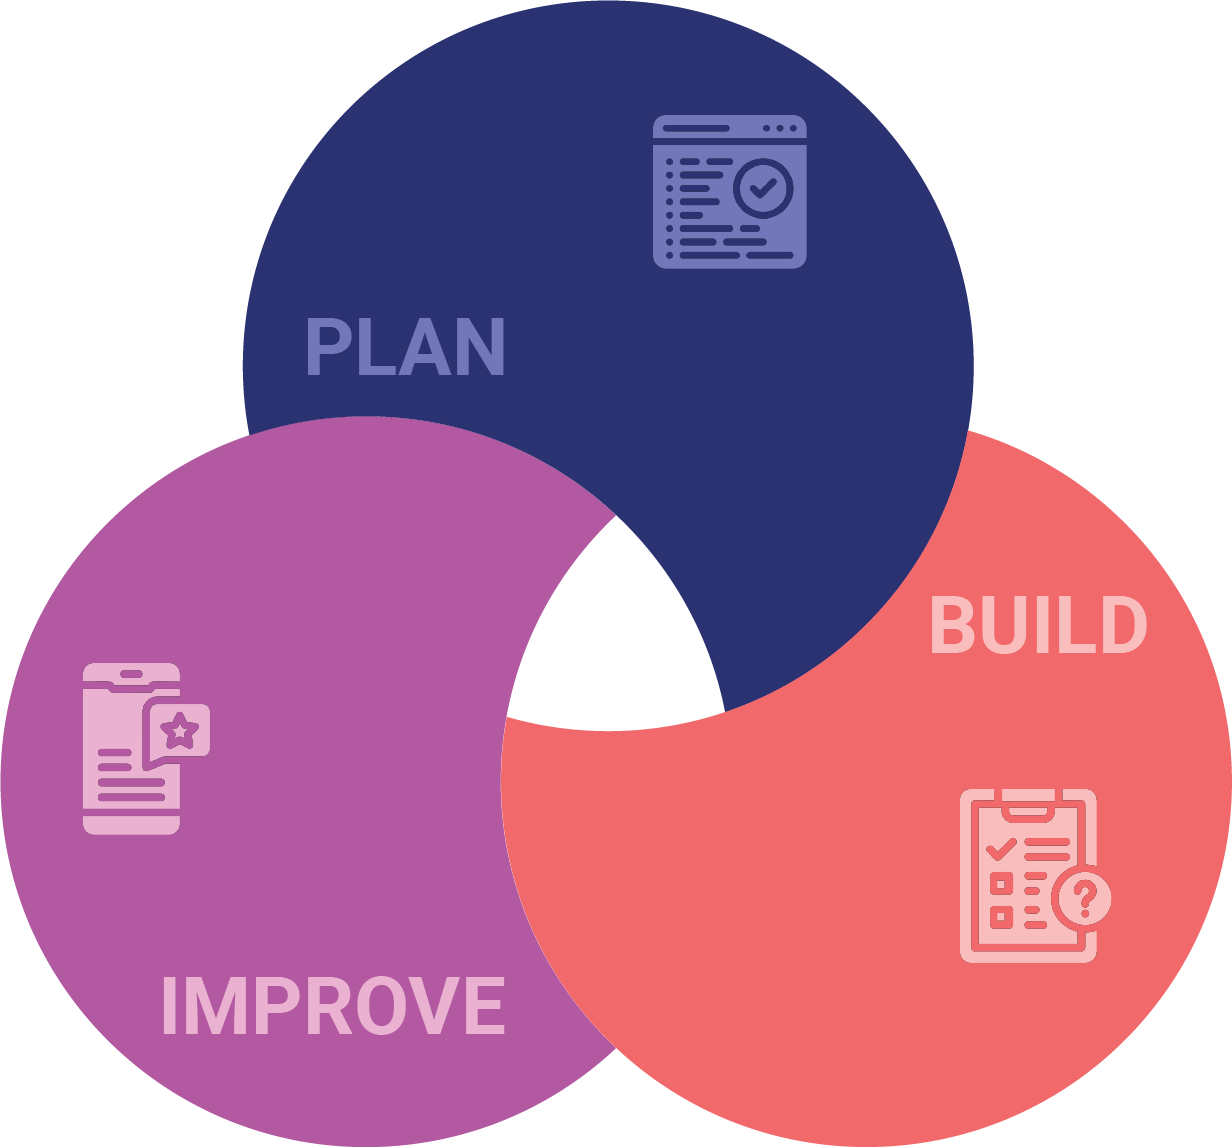 A diagram showing the process of planning, building, and improving at PCS.